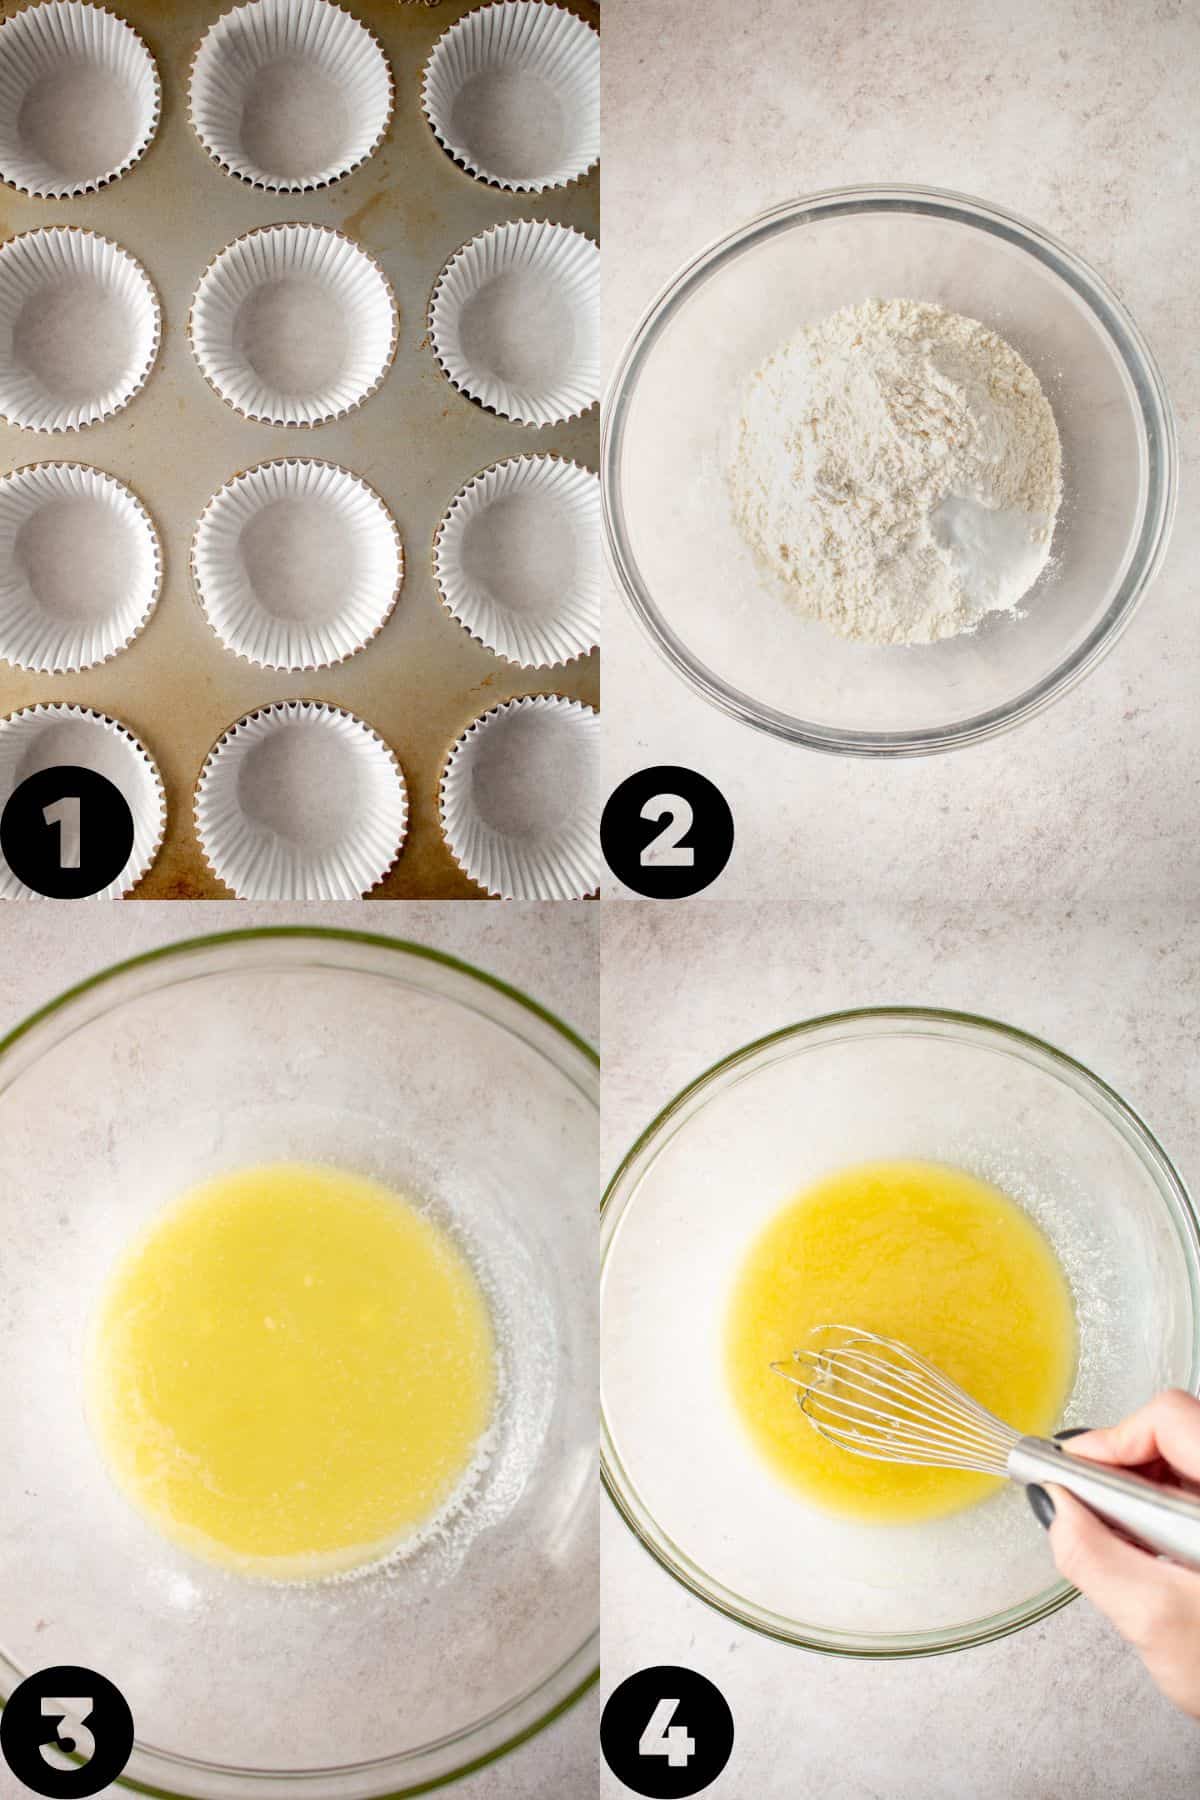 step by step instructions - prepped pan, sifted together dry ingredients, melted butter and added sugar